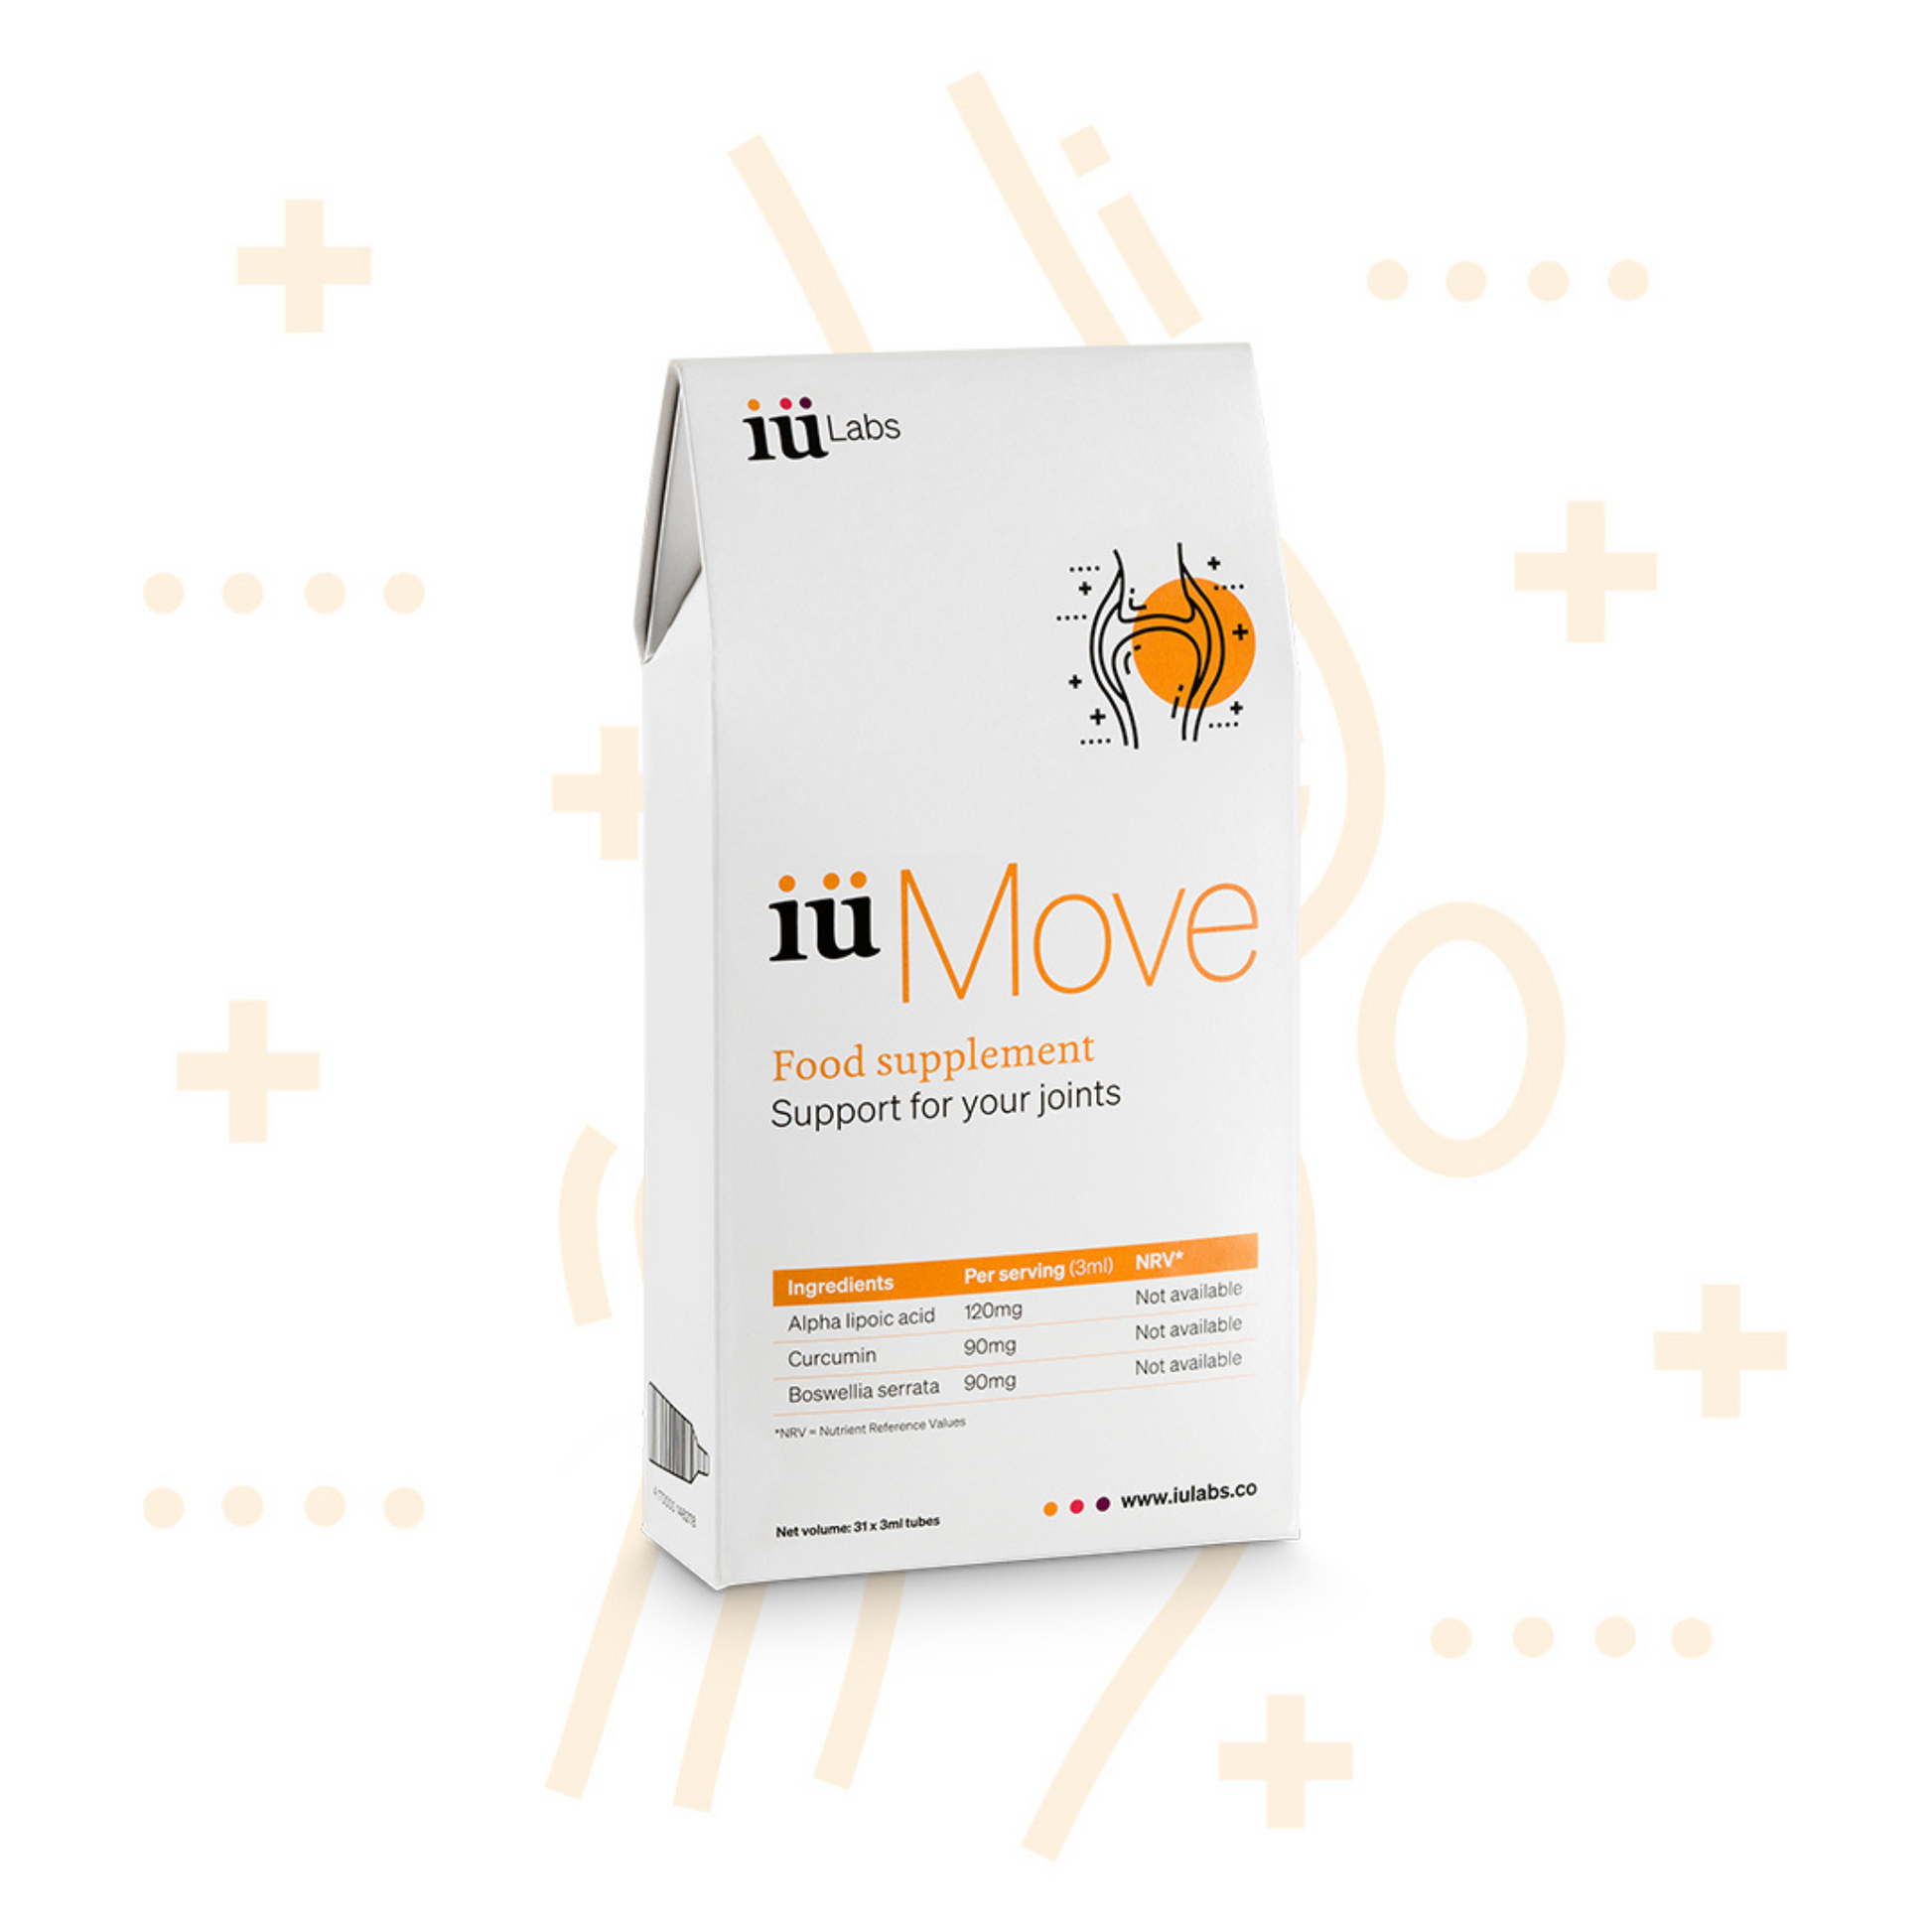 Trial pack of iüMove from iüLabs, joint health support supplement, iuMove, iuLabs, 10 day pack, with pattern background